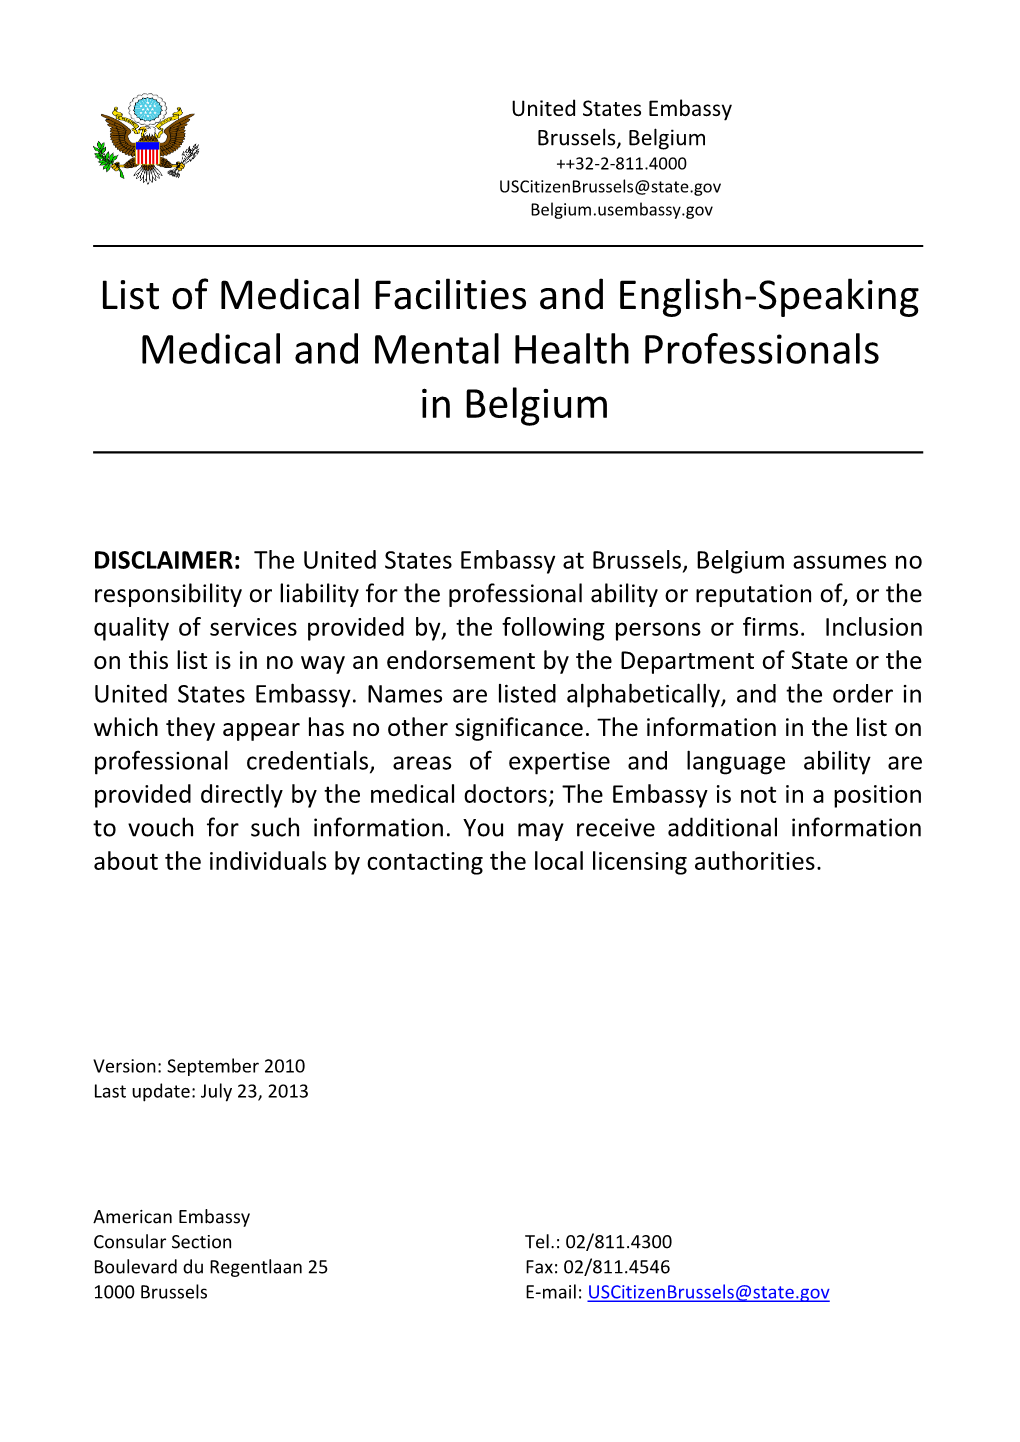 List of Medical Facilities and English-Speaking Medical and Mental Health Professionals in Belgium